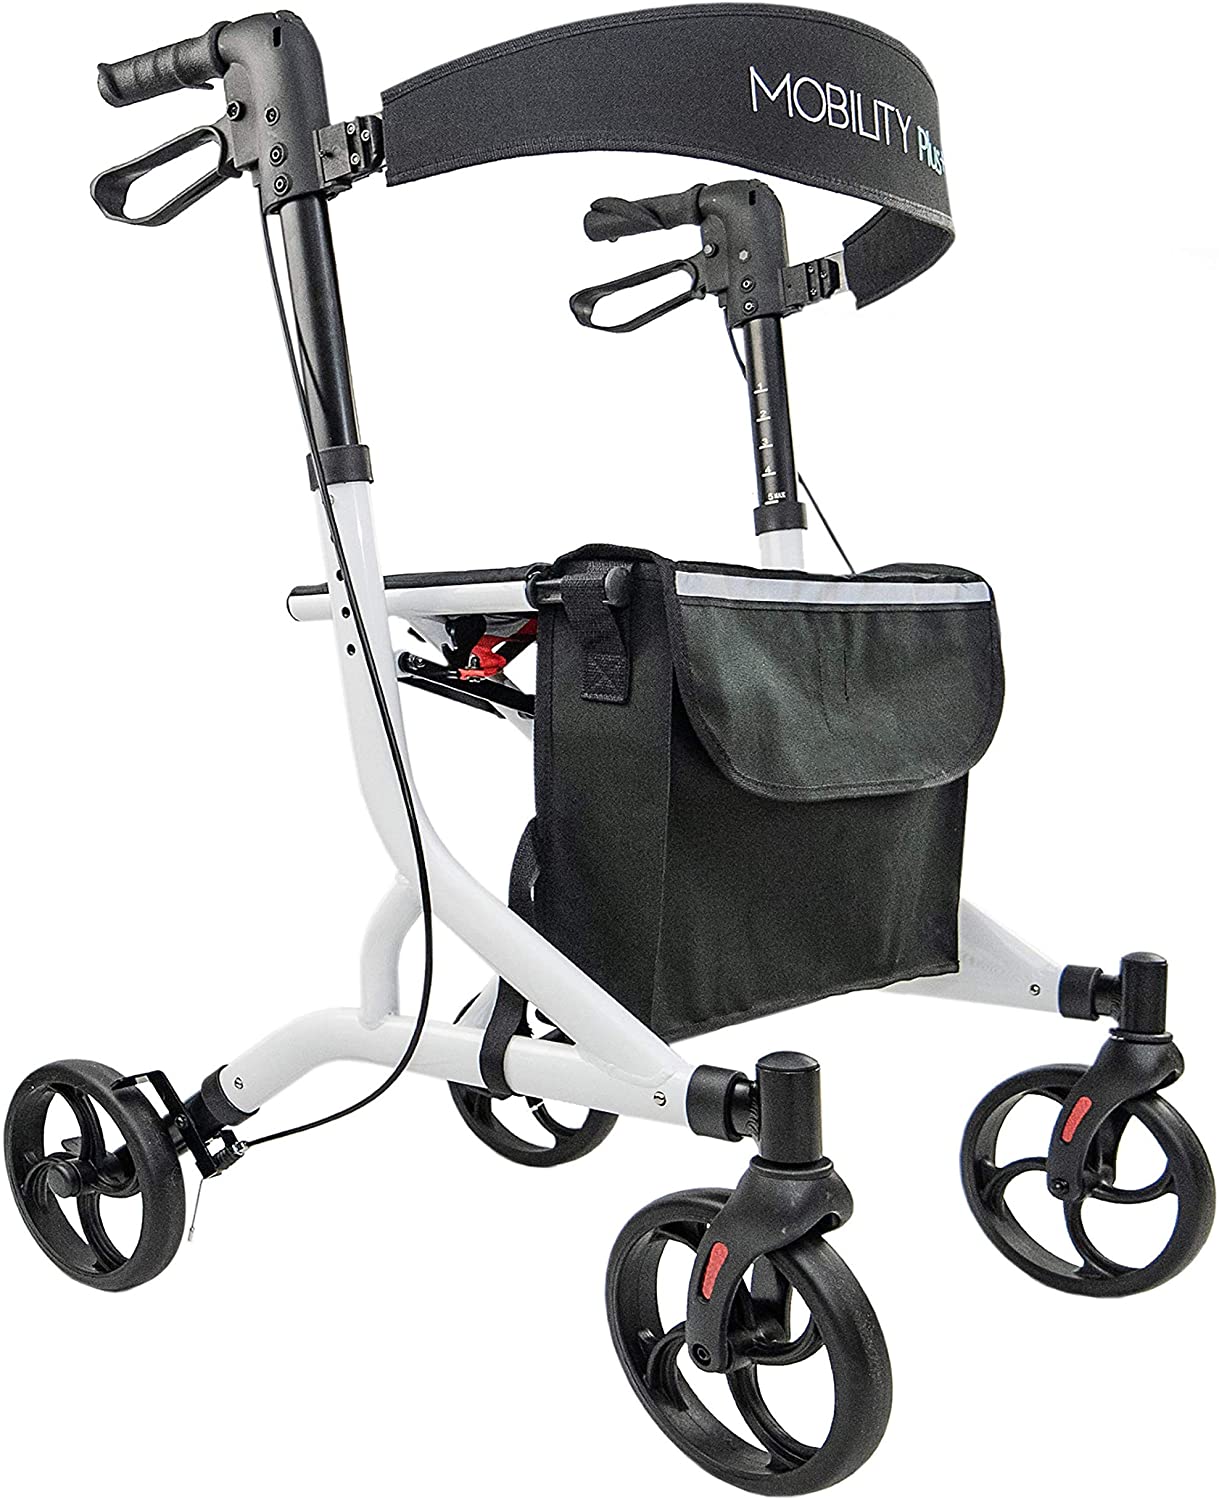 MOBILITY Plus+ LR10+ Lightweight Rollator - Indoor and Outdoor Walker - Foldable - Height 